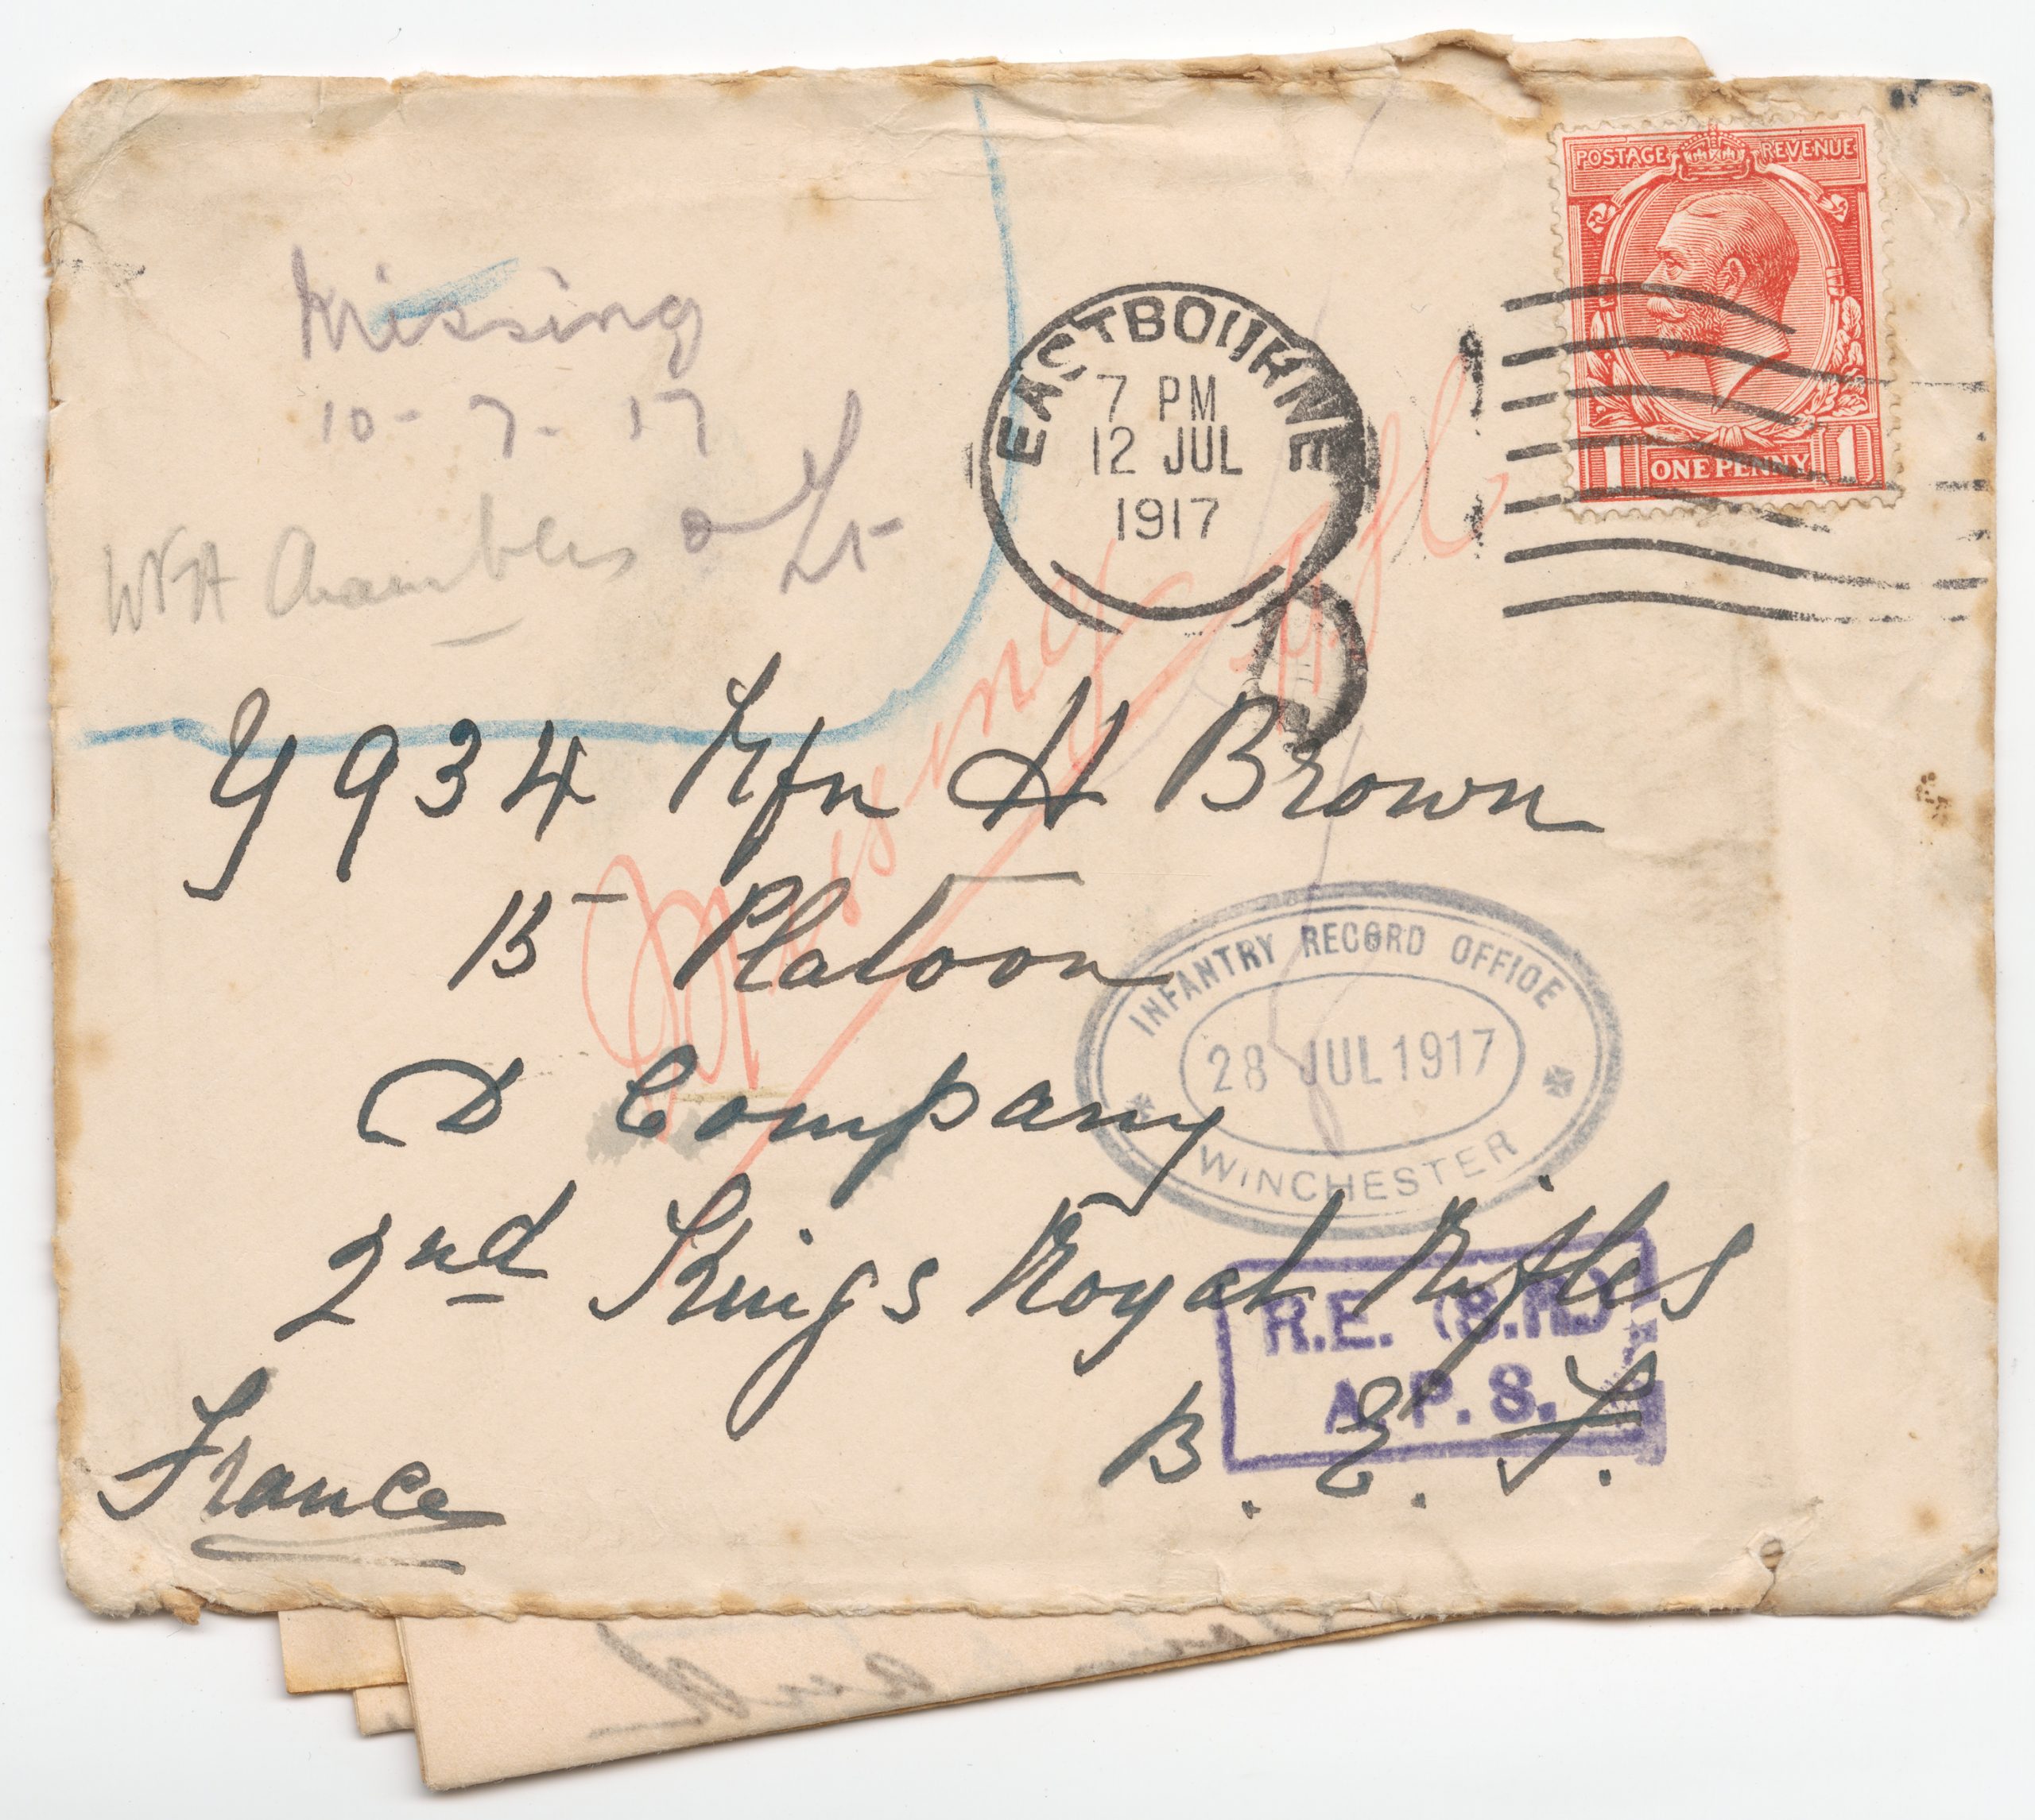 The front of a letter with address of Harry Brown along with handstamps and the hand written annotation 'Missing 10-7-17'. 